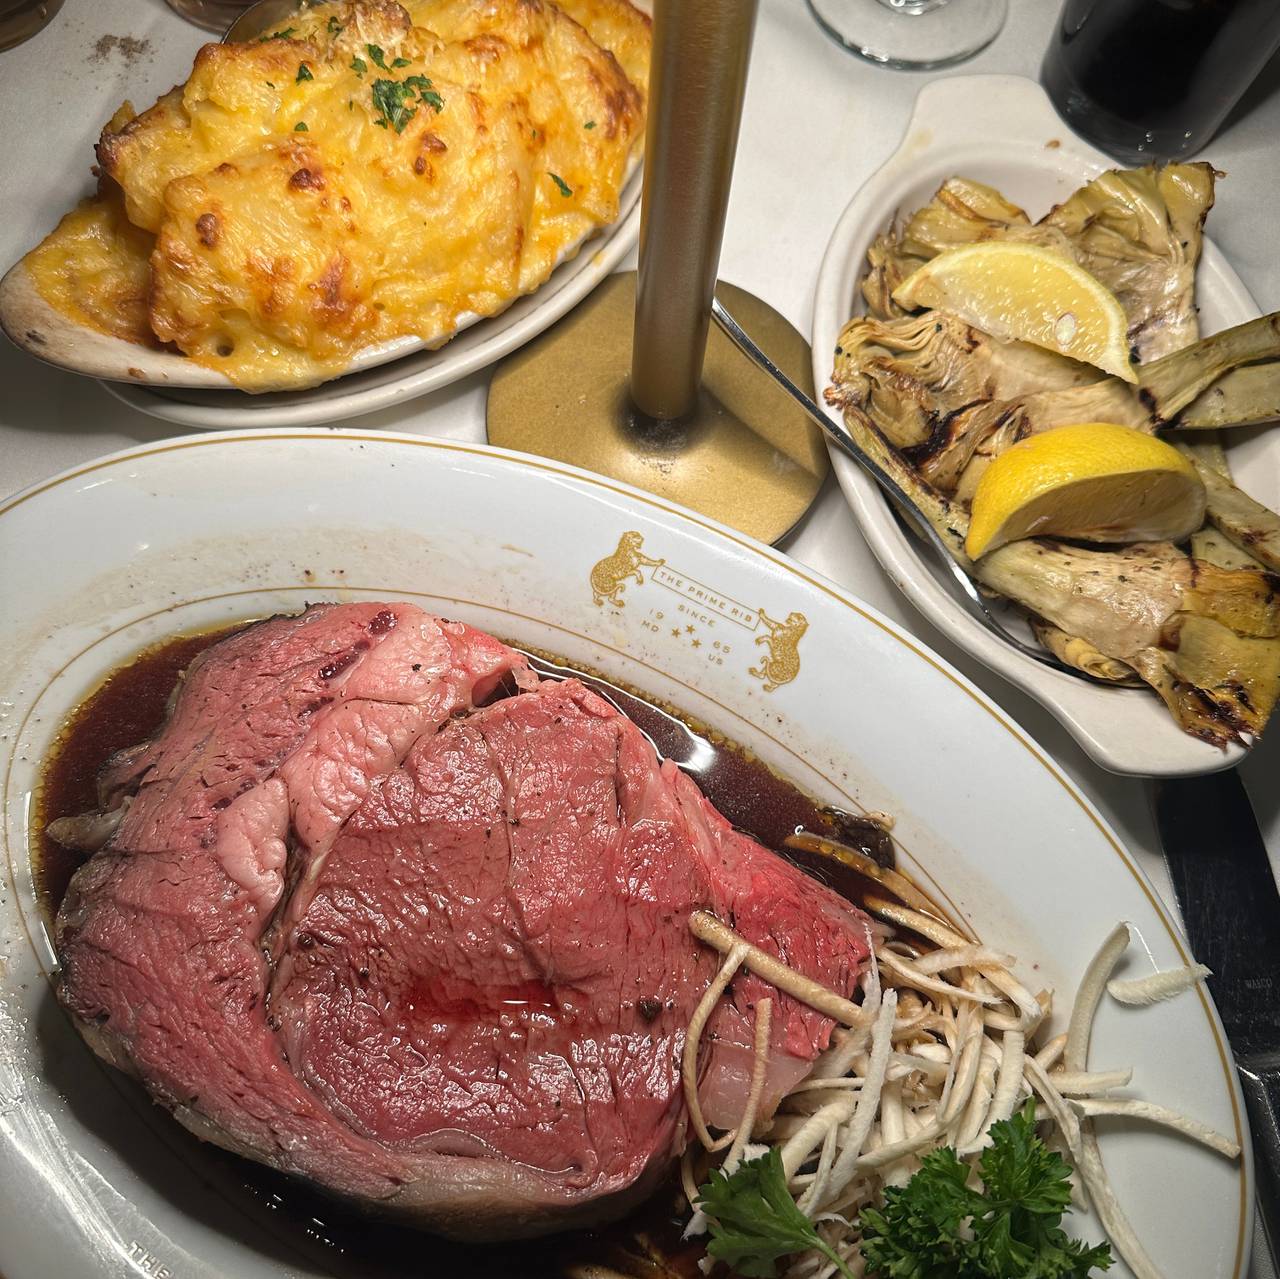 Clockwise from top left: potatoes au gratin, grilled artichoke hearts and prime rib at The Prime Rib.